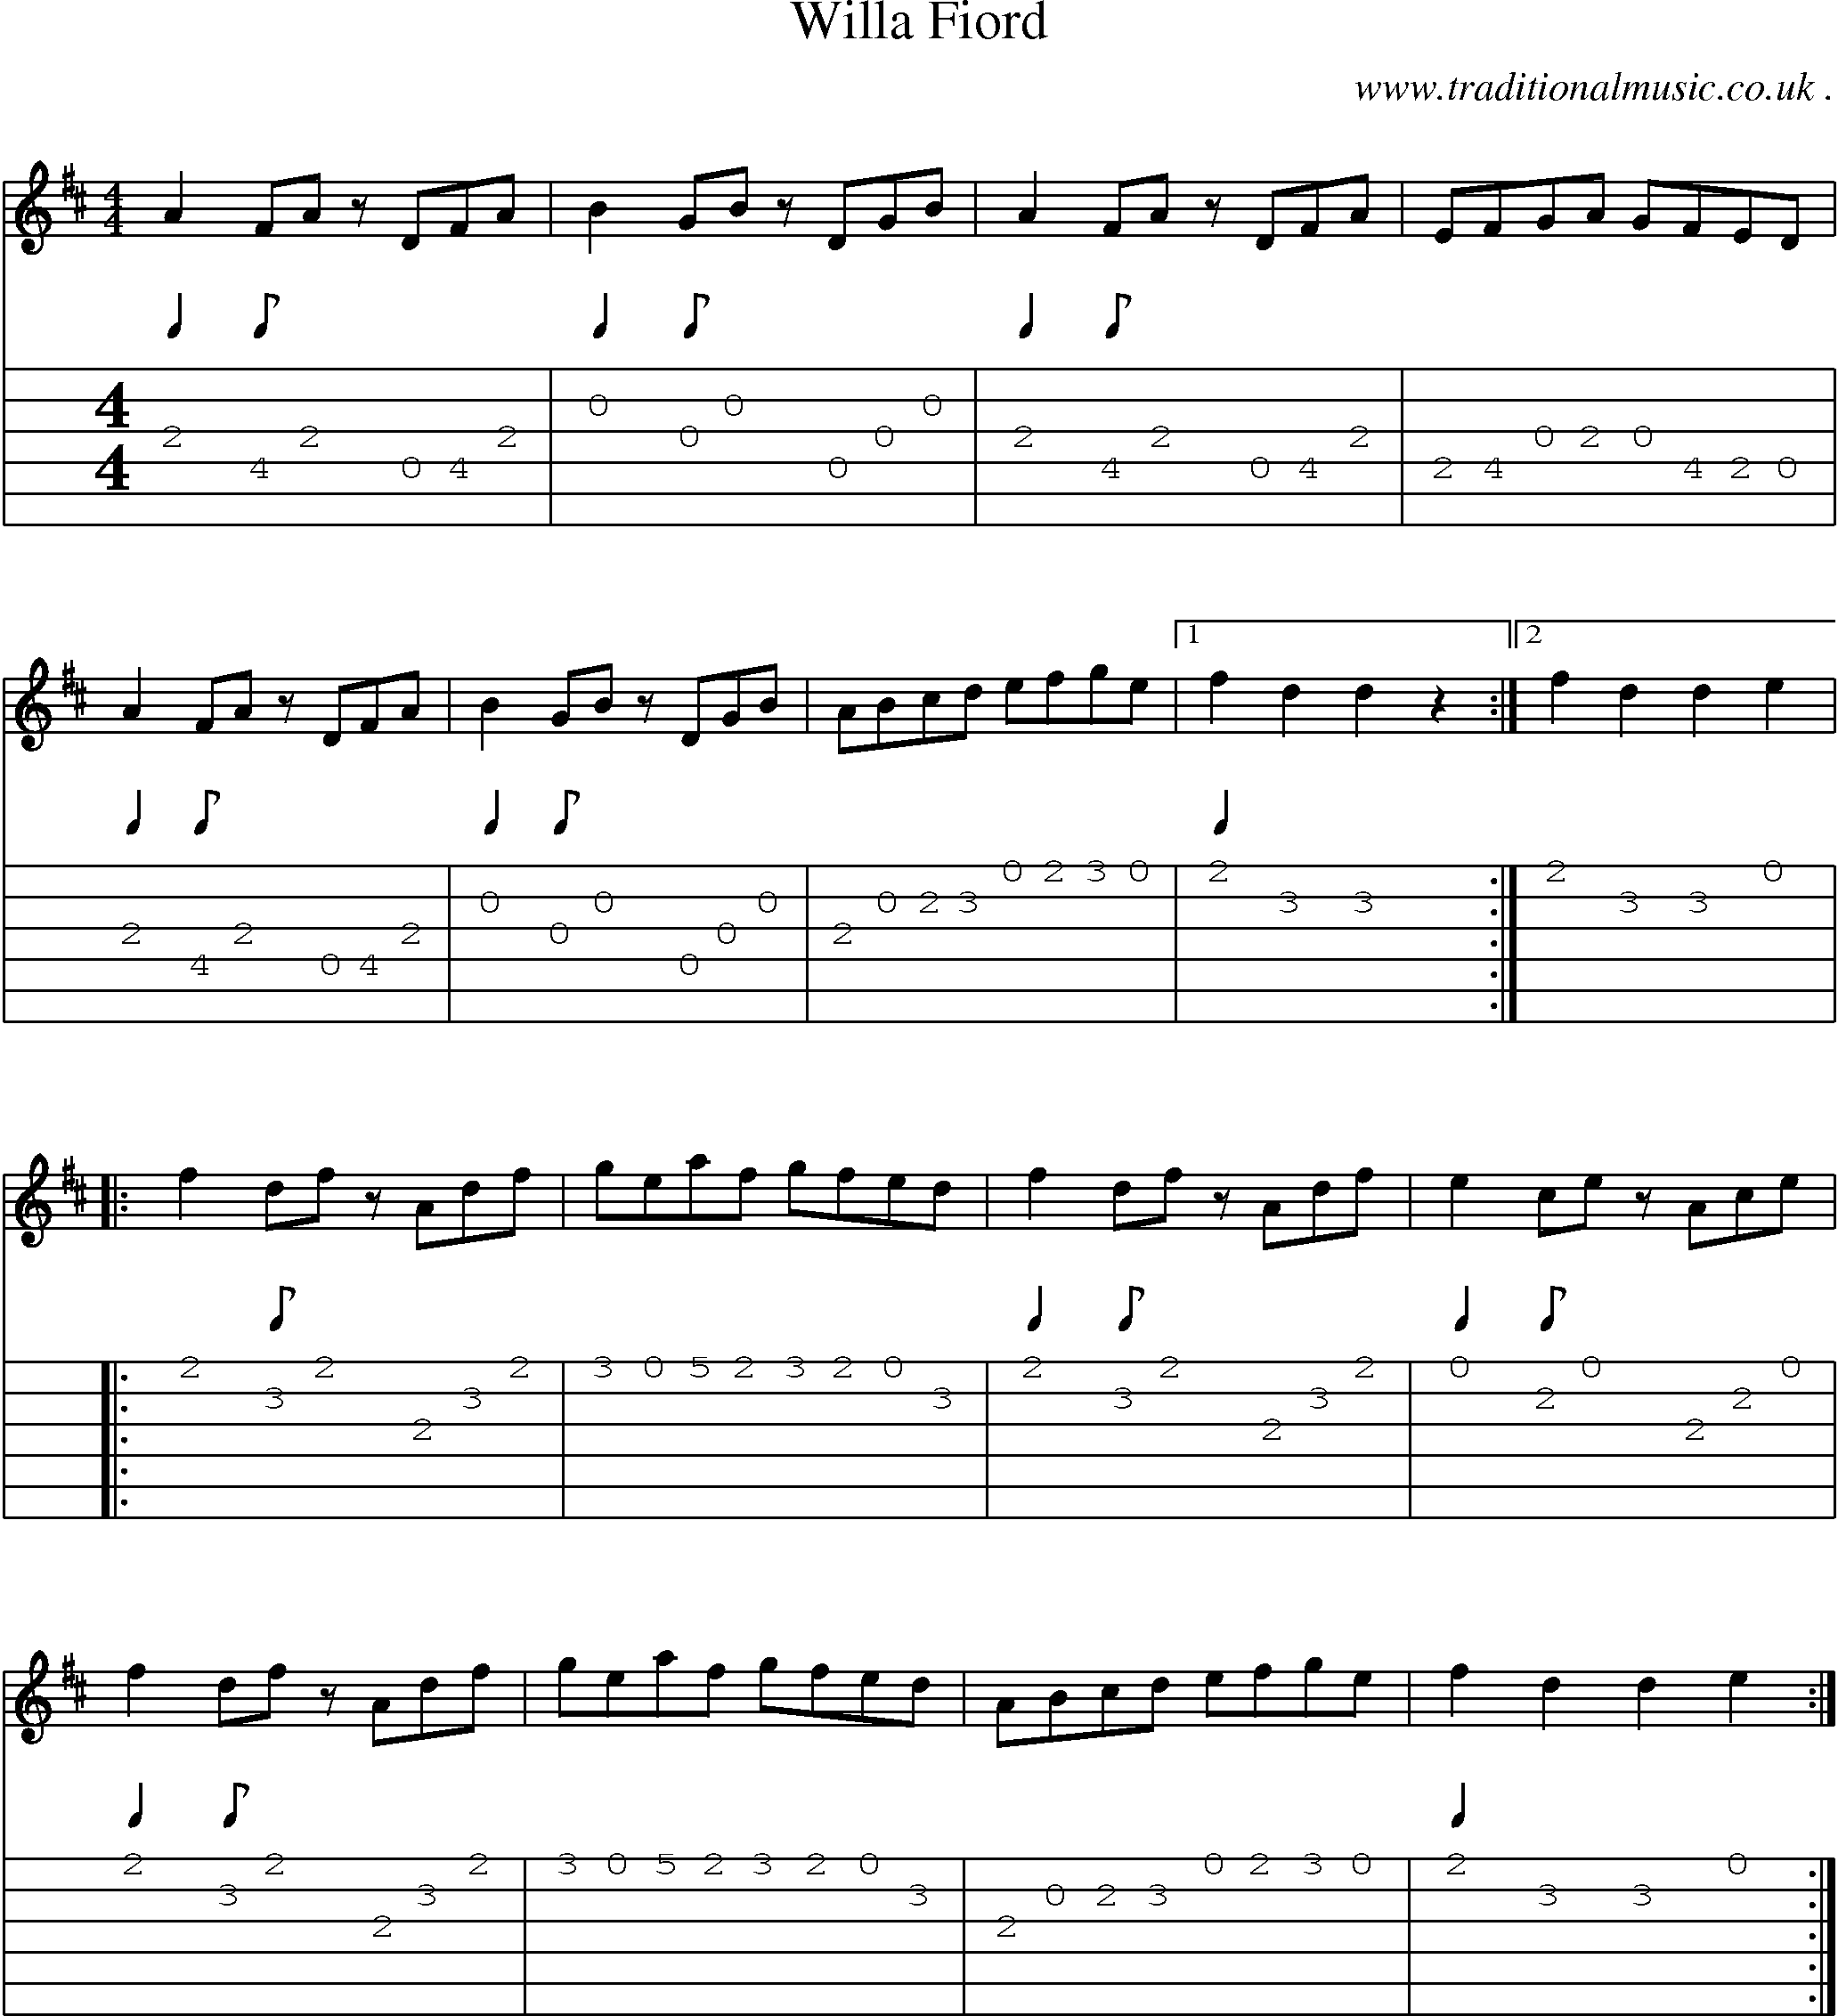 Sheet-Music and Guitar Tabs for Willa Fiord